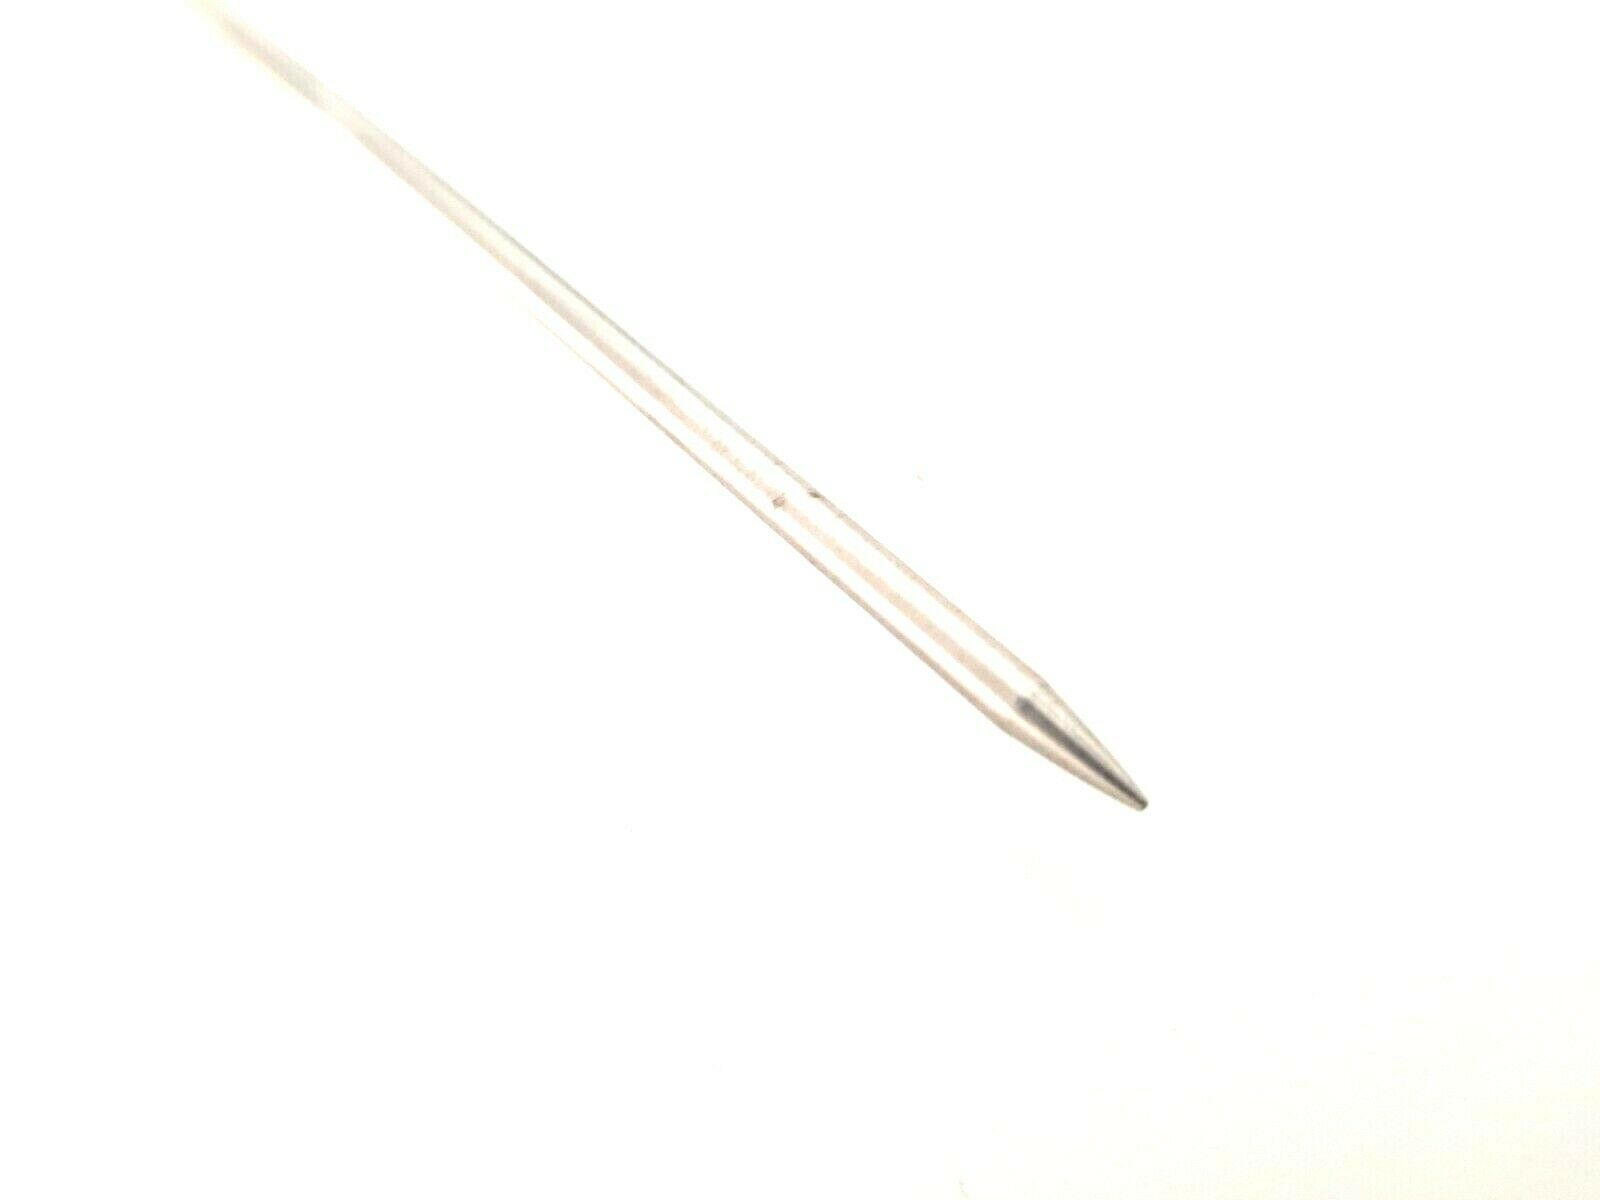 K Type Thermocouple Sensor Pointed Tip Flexible Cable